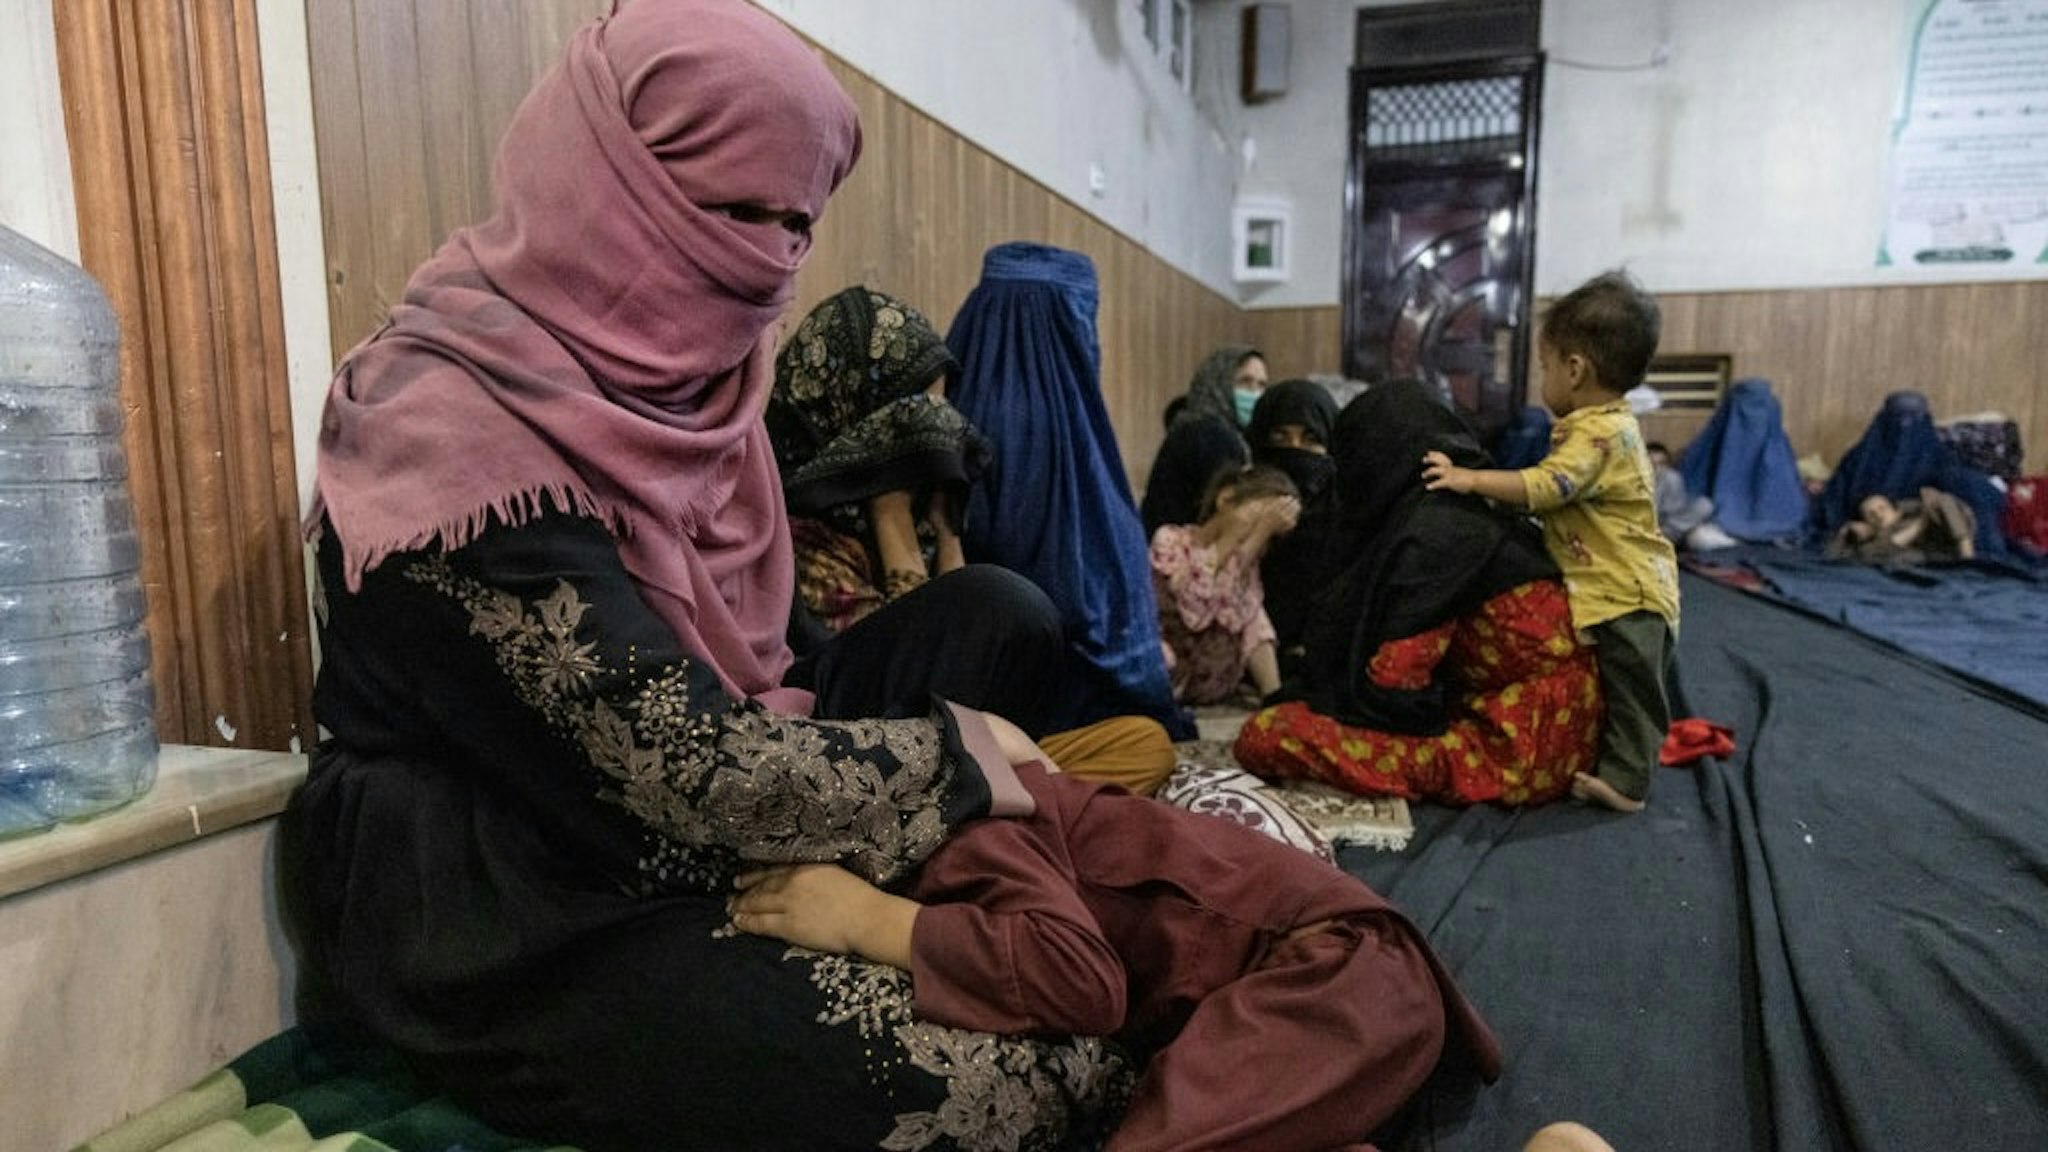 More Displaced Afghans Arrive In Kabul As Taliban Gains Ground KABUL, AFGANISTAN - AUGUST 13 : Displaced Afghan women and children from Kunduz are seen at a mosque that is sheltering them on August 13, 2021 in Kabul, Afghanistan. Tensions are high as the Taliban advance on the capital city after taking Herat and the country's second-largest city Kandahar. (Photo by Paula Bronstein /Getty Images) Paula Bronstein / Stringer via Getty Images